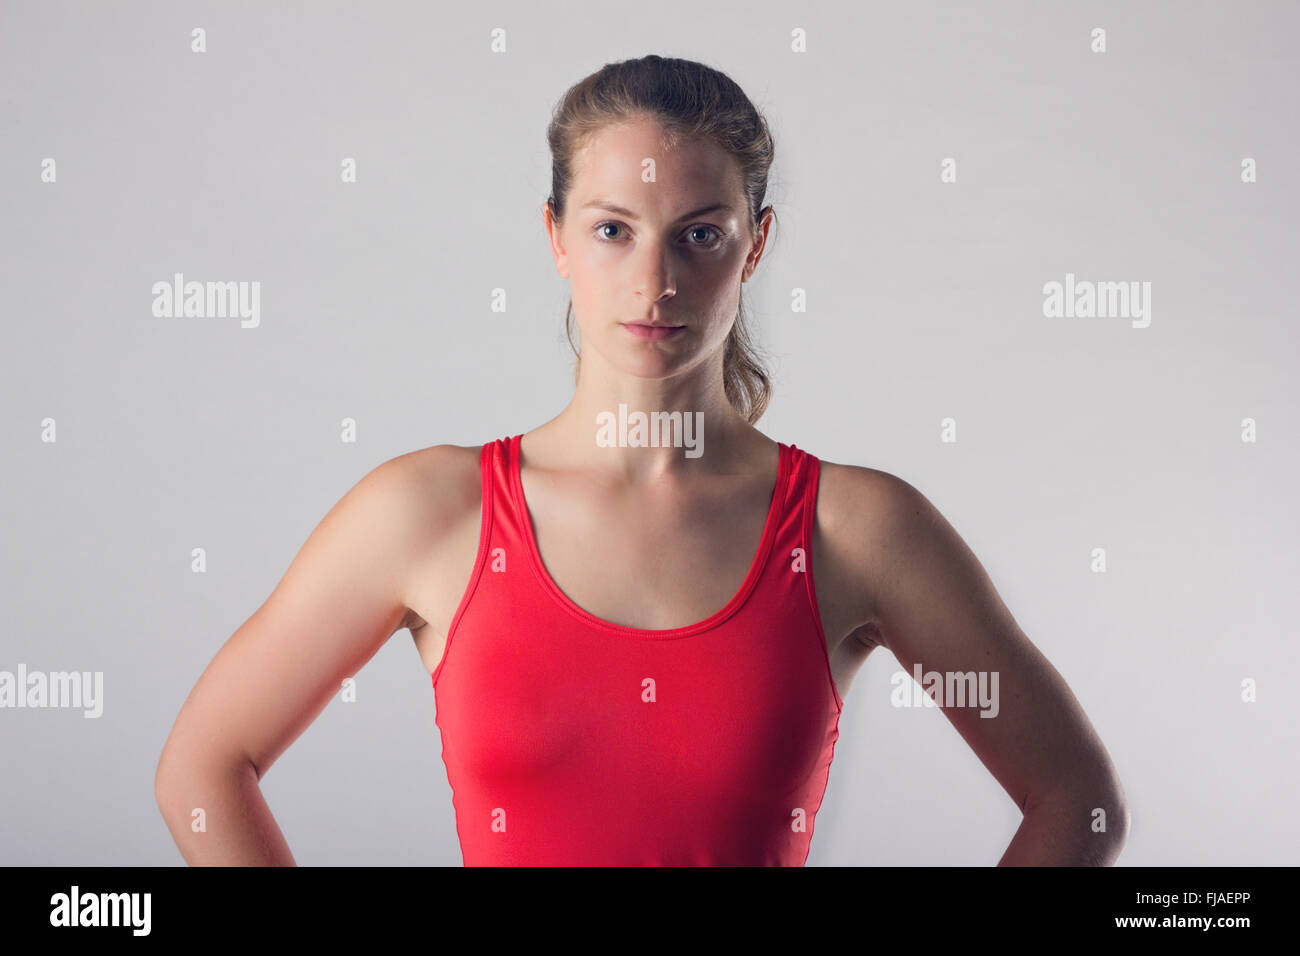 woman,athlete,achieve,determination,action,fitness,training,active,adult,athletic,run,attitude,brunette,competition,ready,female Stock Photo